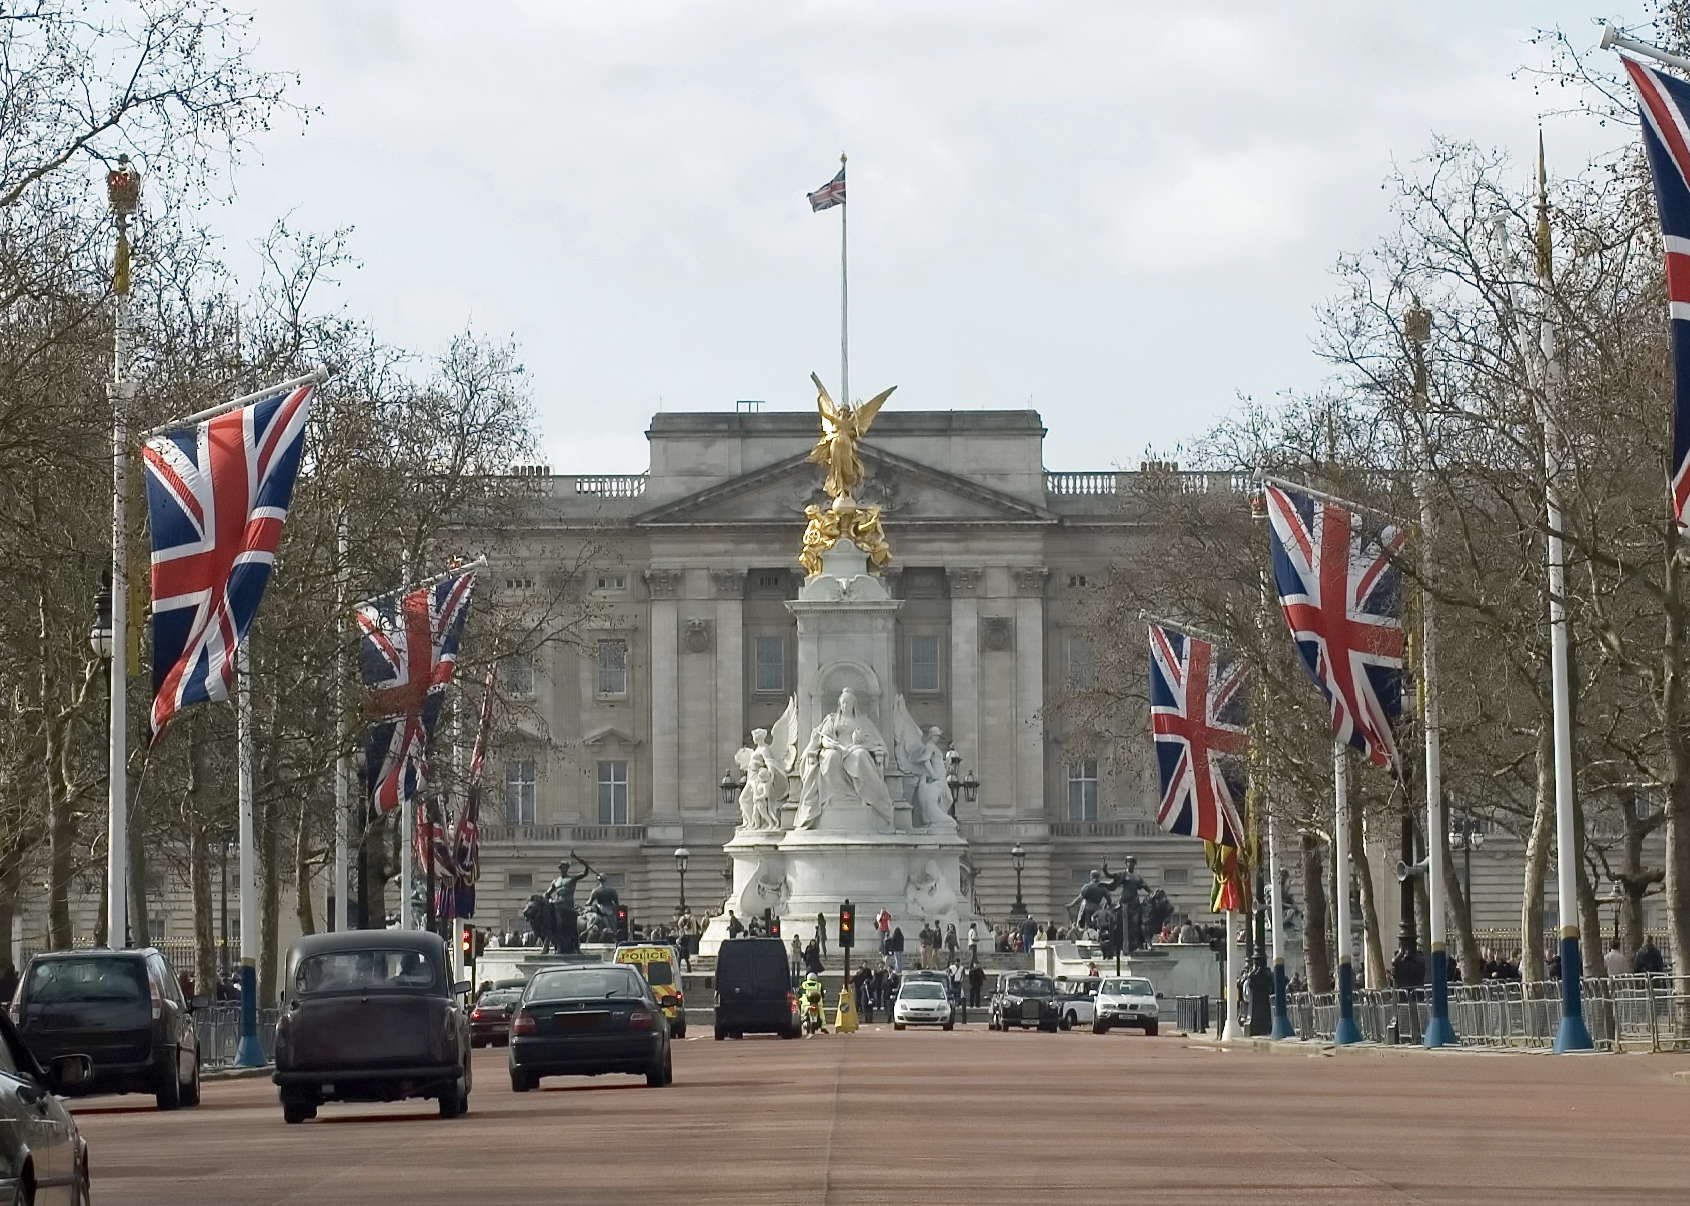 Buckingham Palace lies at the end of The Mall in London, England. (mlane / Getty Images)